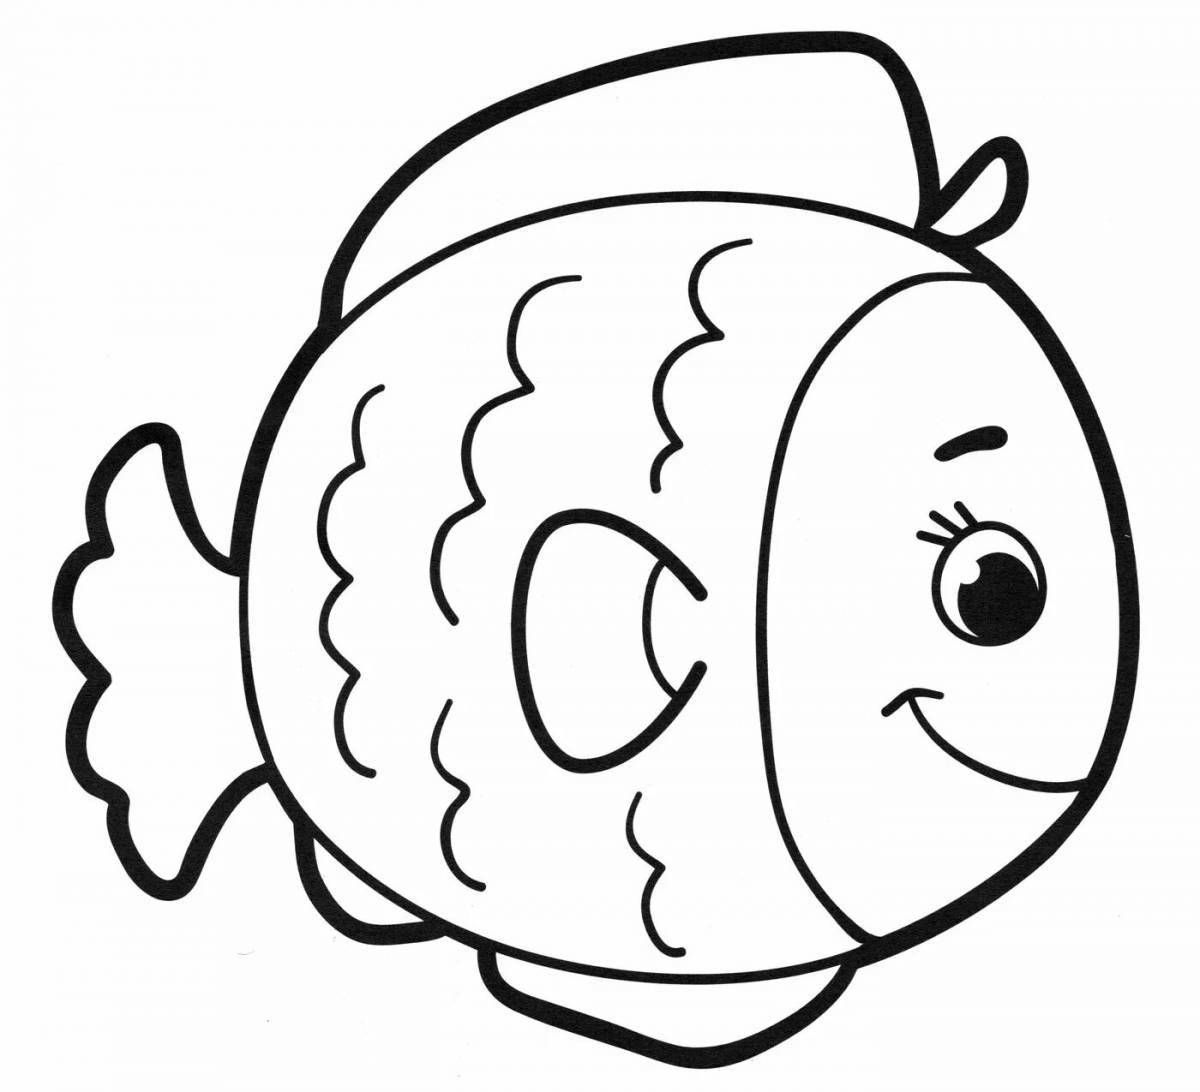 Incredible fish coloring book for 3-4 year olds